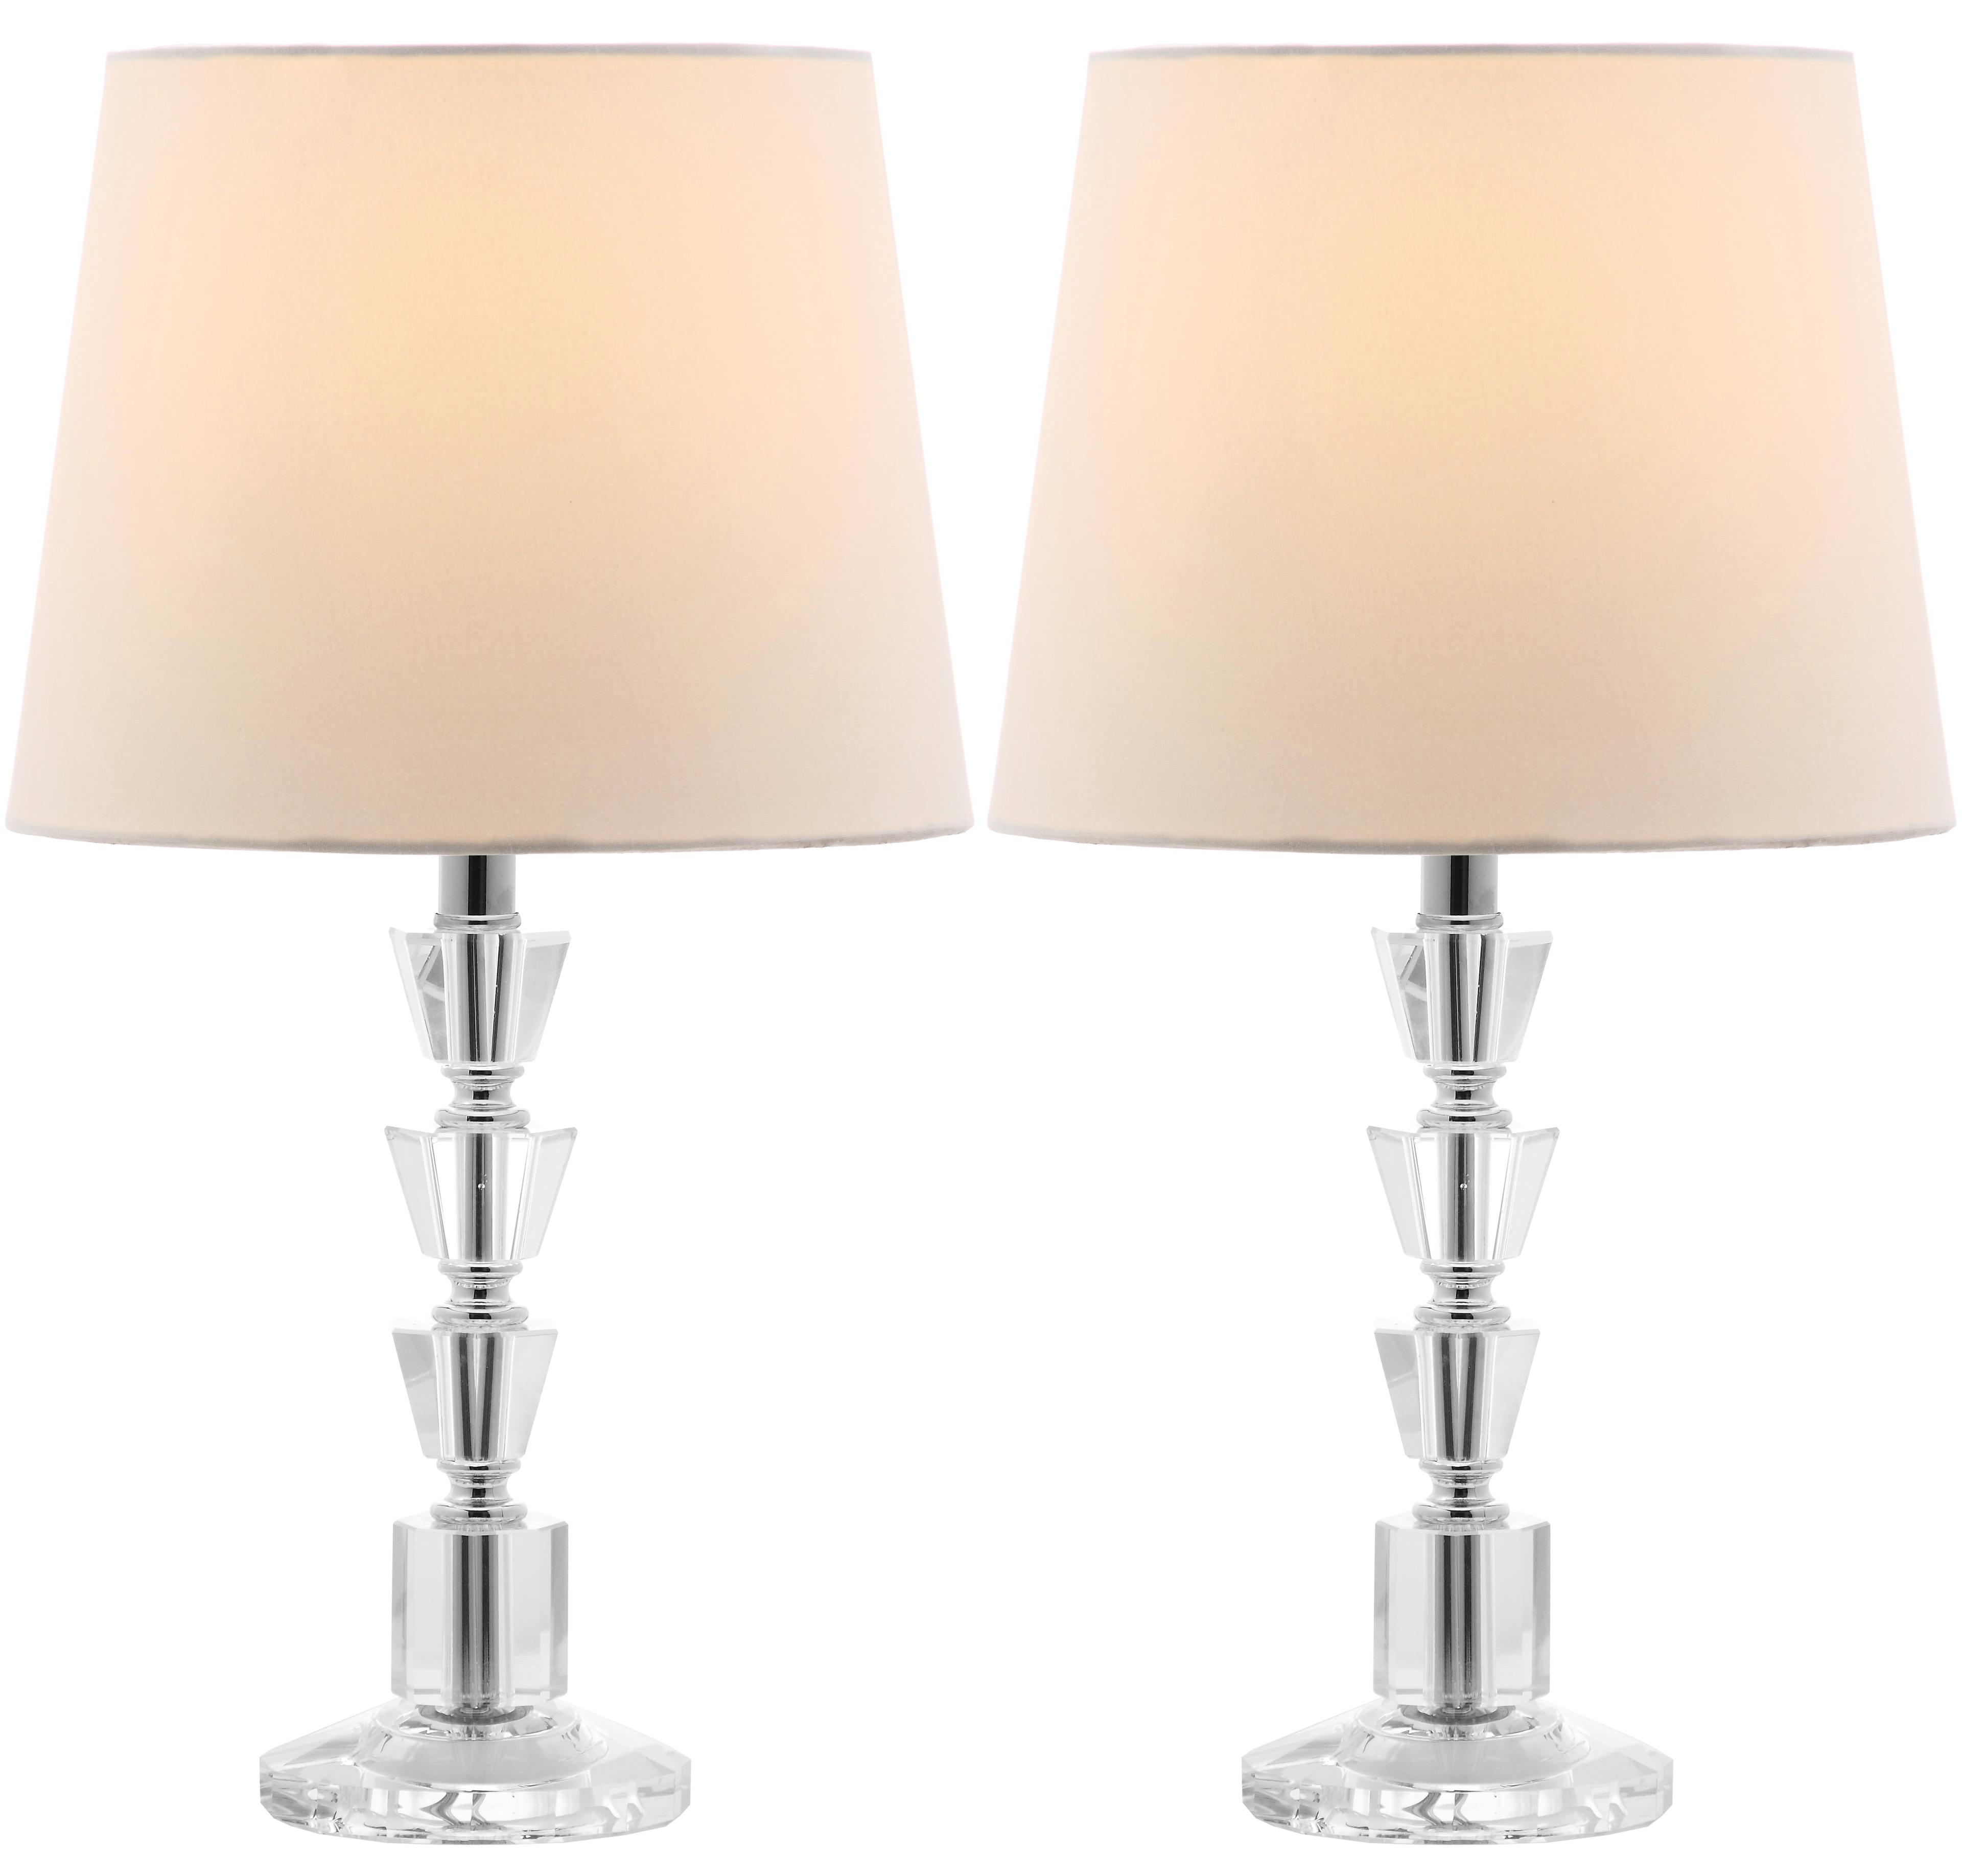 Harlow Tiered Crystal Orb 16" Table Lamp with Off-White Shade, Set of 2